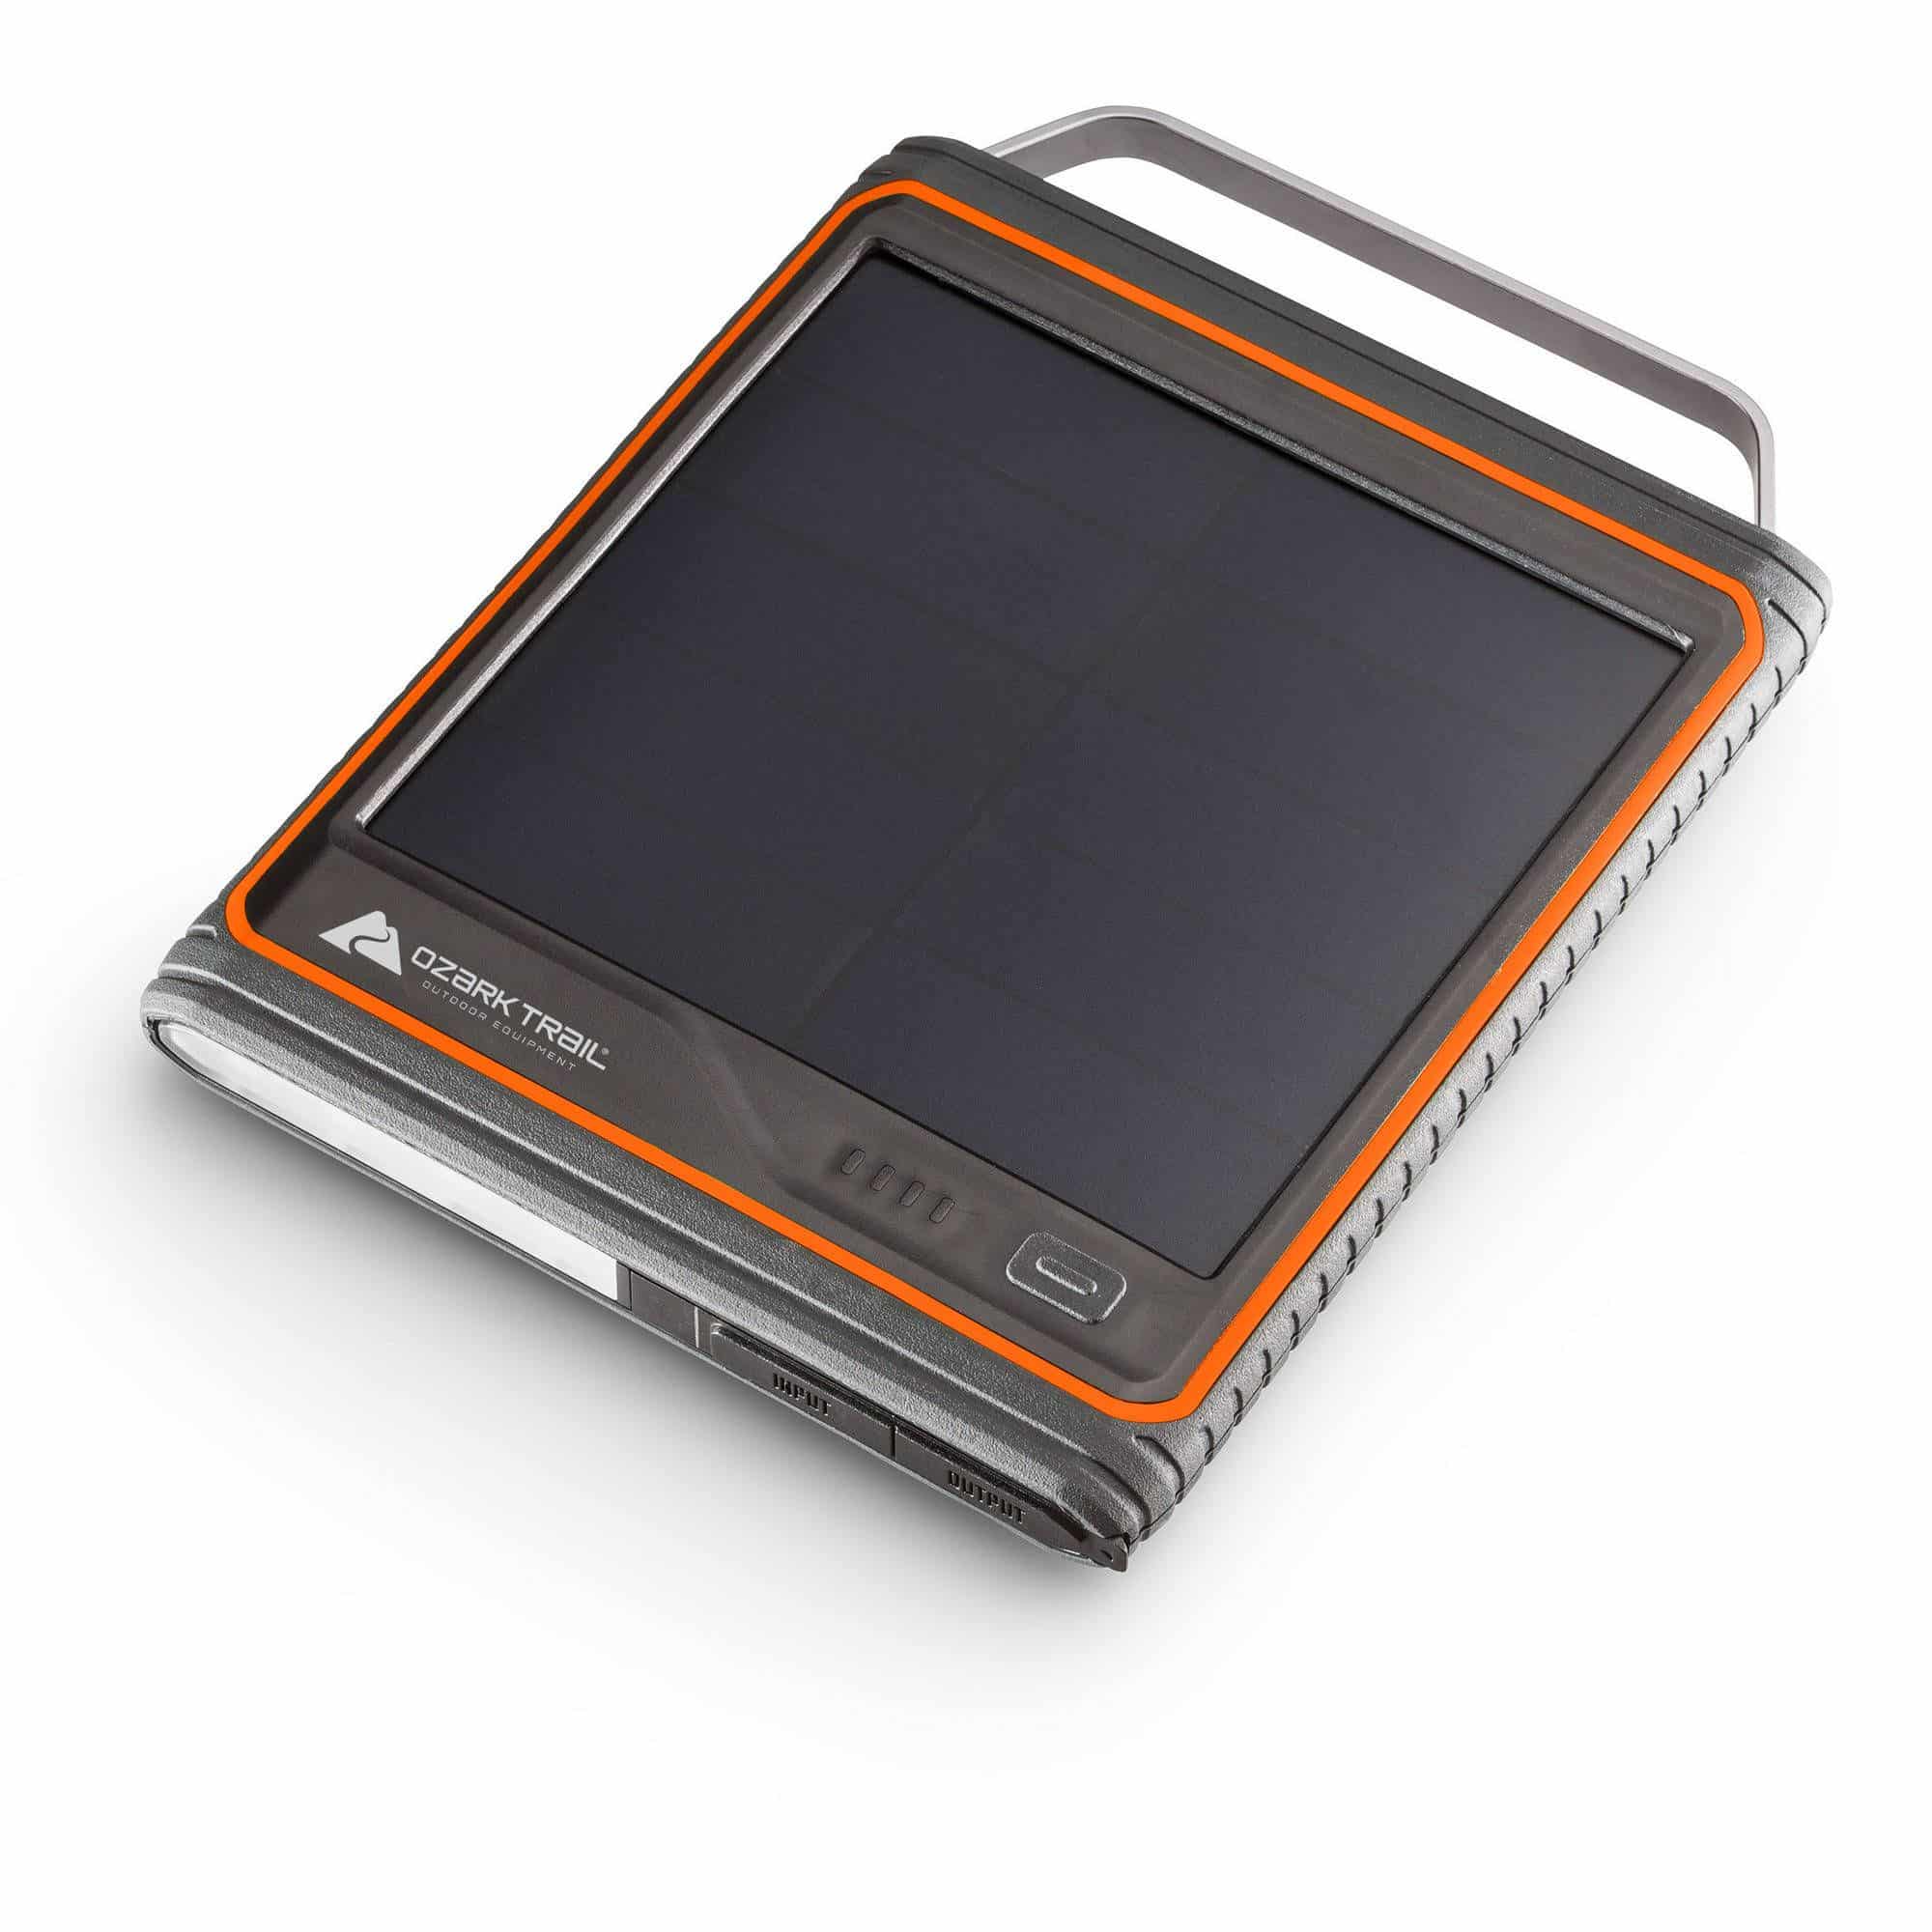 Ozark Trail 2400 Portable Phone Charger with Solar Panel -$18.02(62% Off)